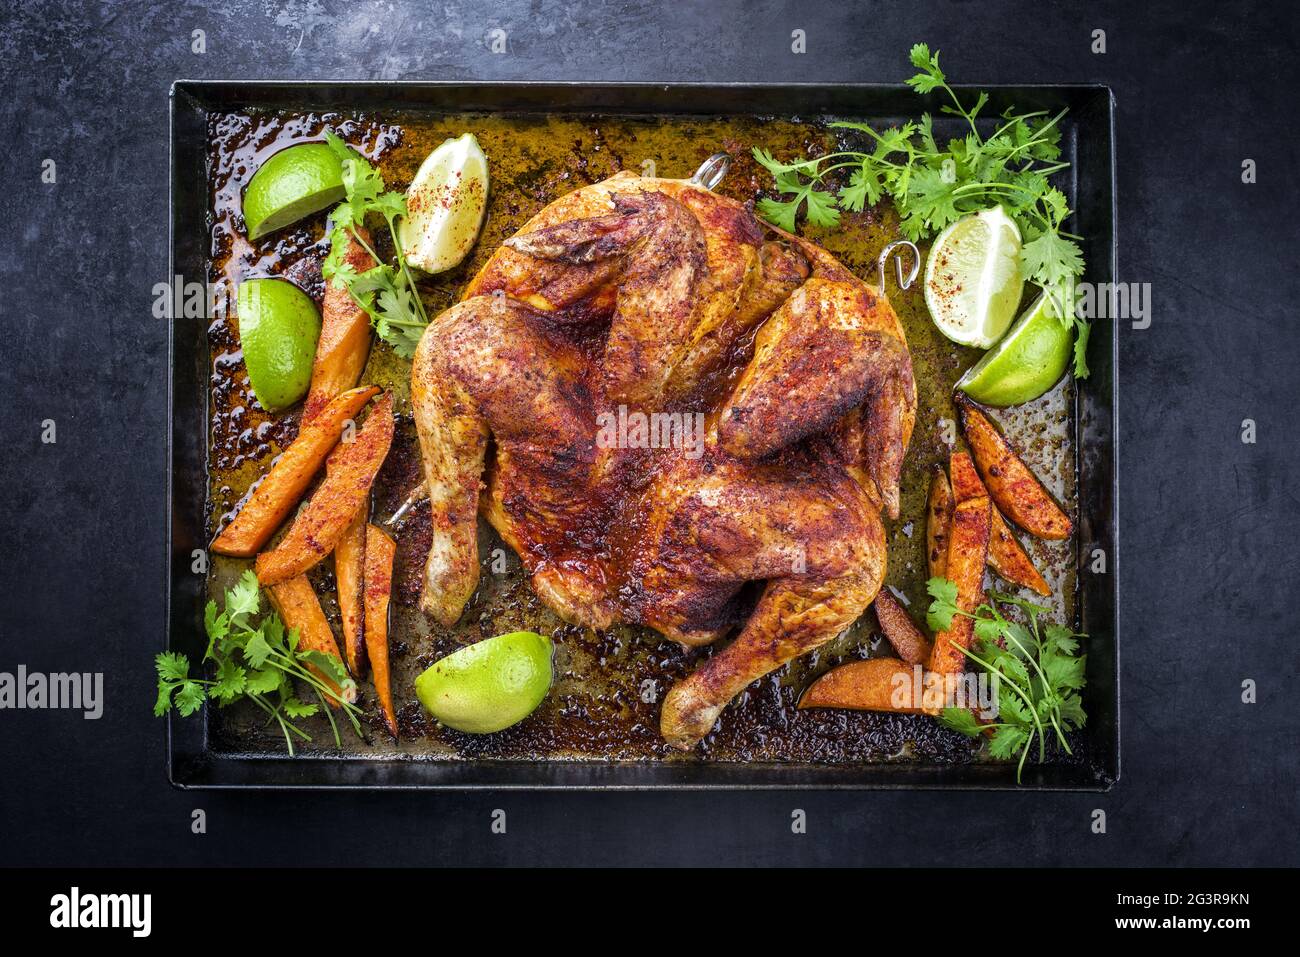 Traditional barbecue spatchcocked chicken al mattone chili with sweet potato chips and limes offered as top view on an old rusti Stock Photo